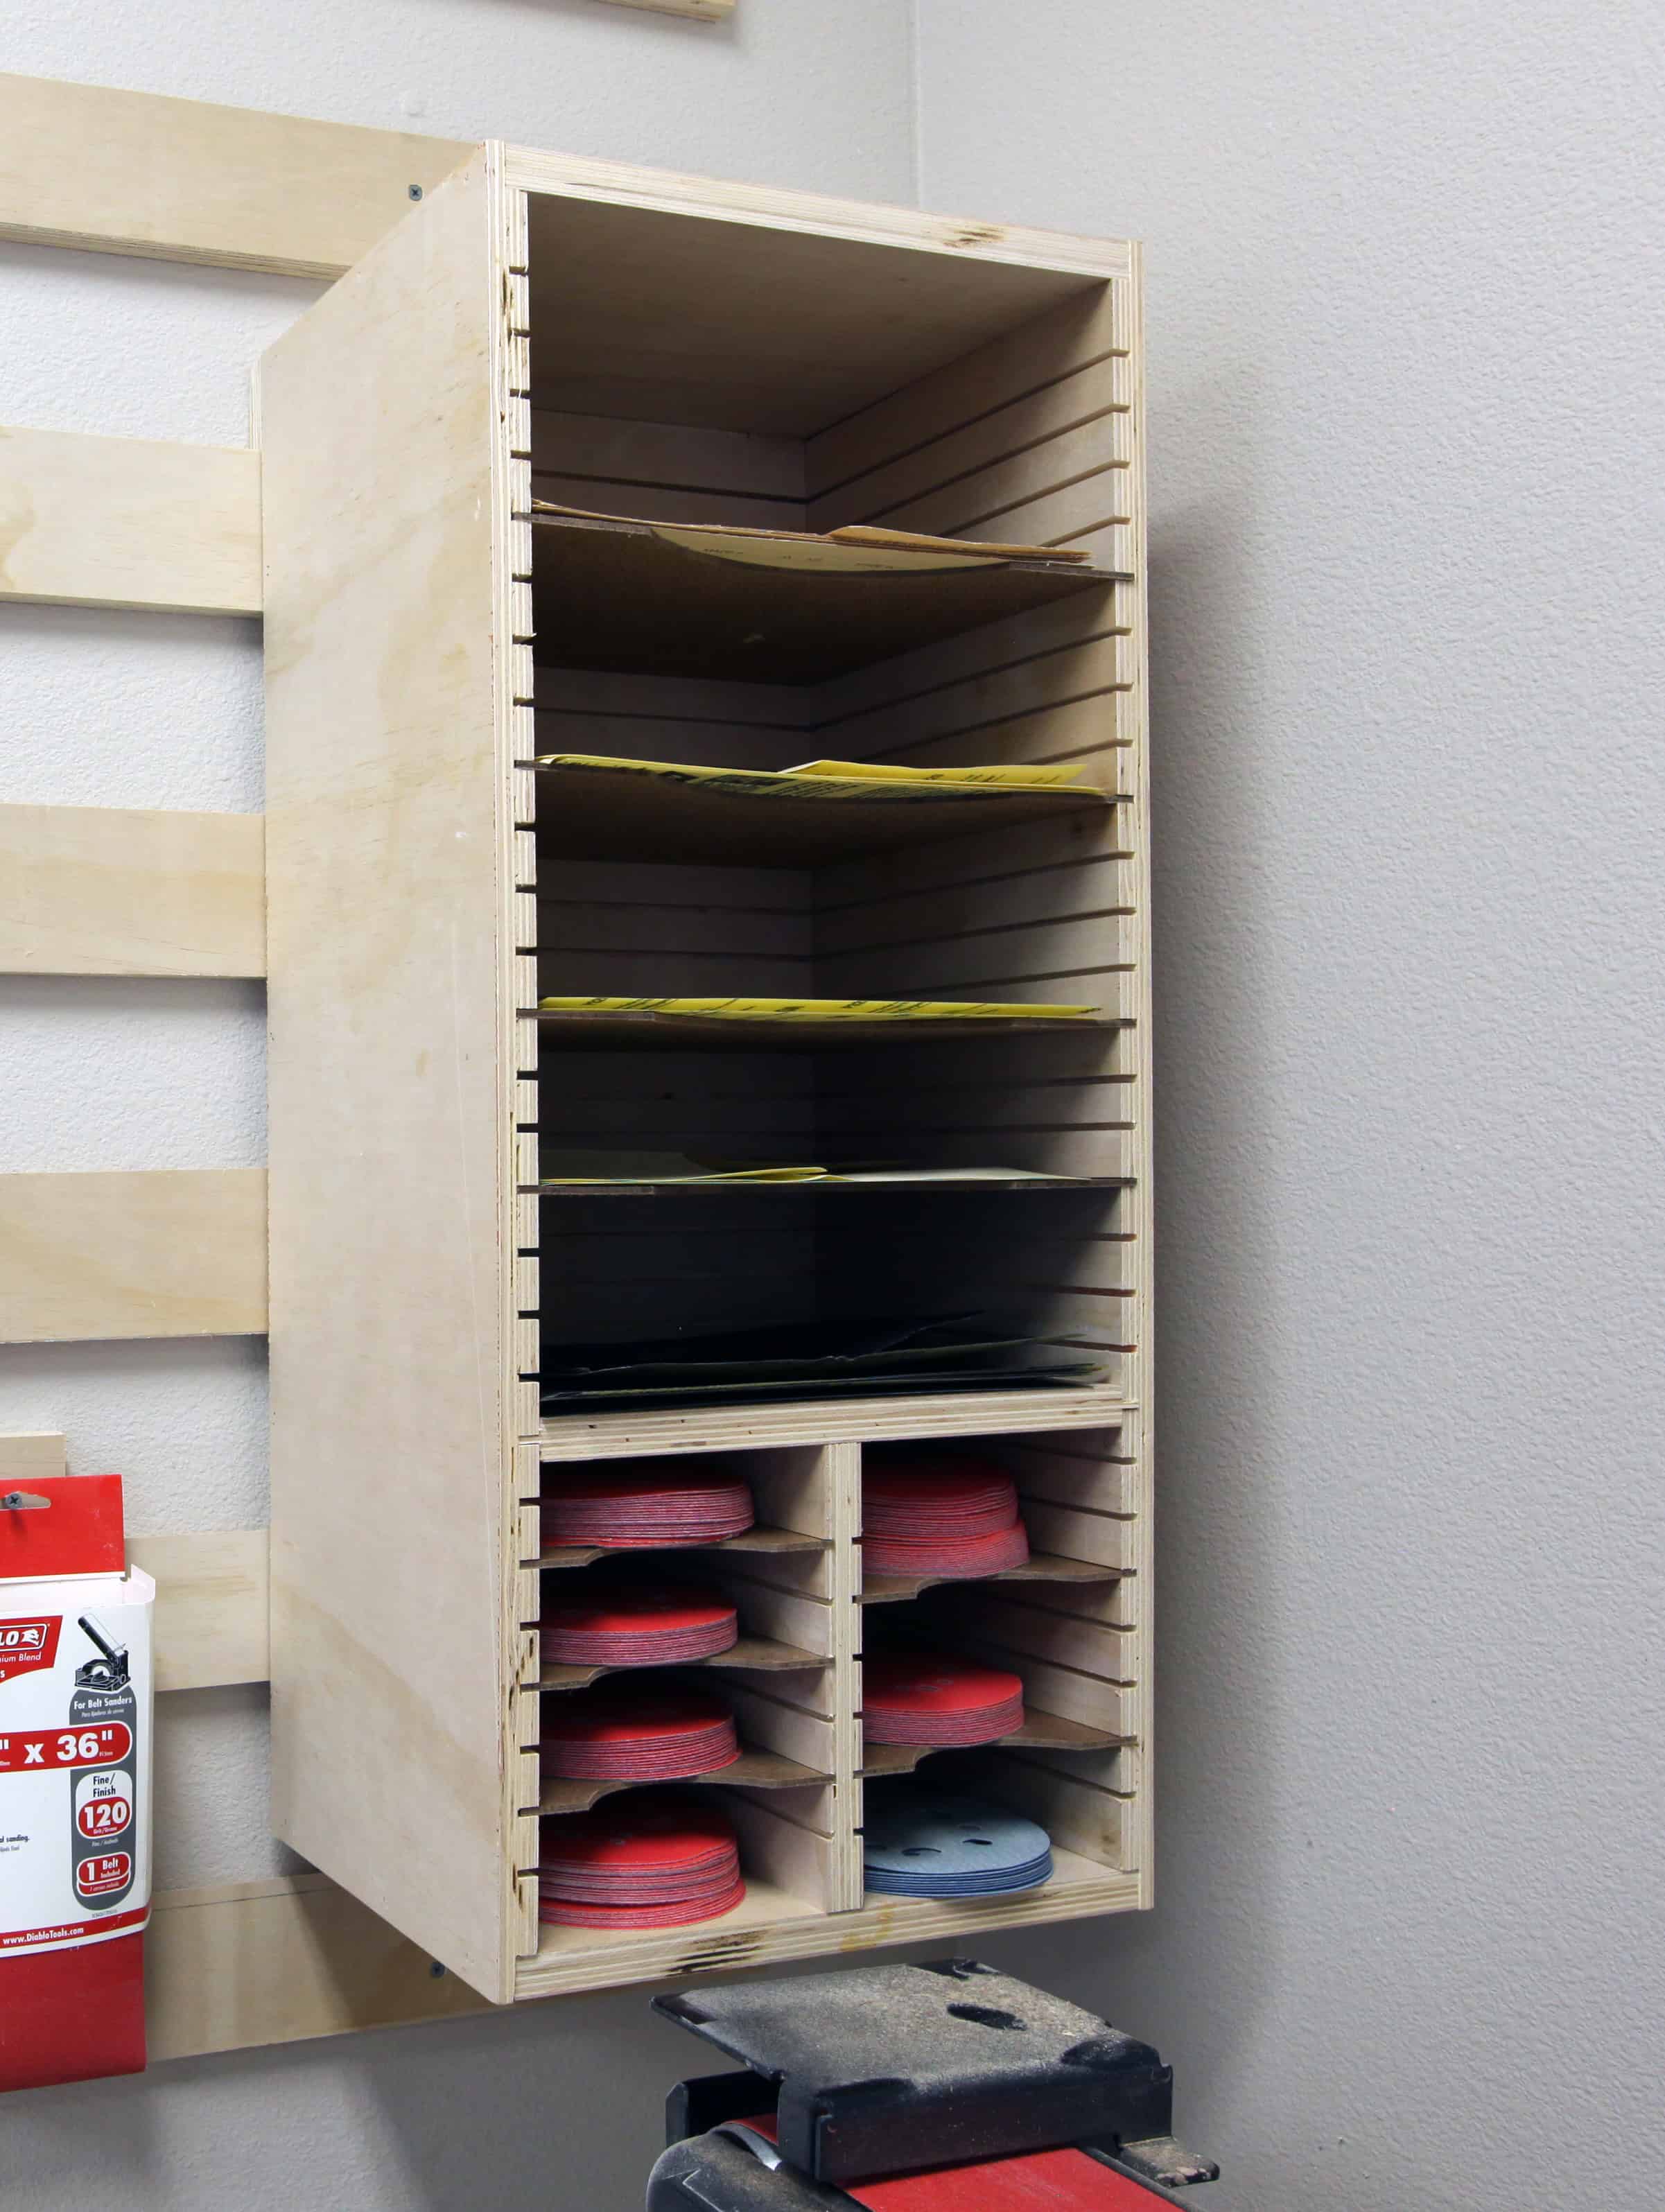 How to make a Sandpaper Storage Station - The Geek Pub